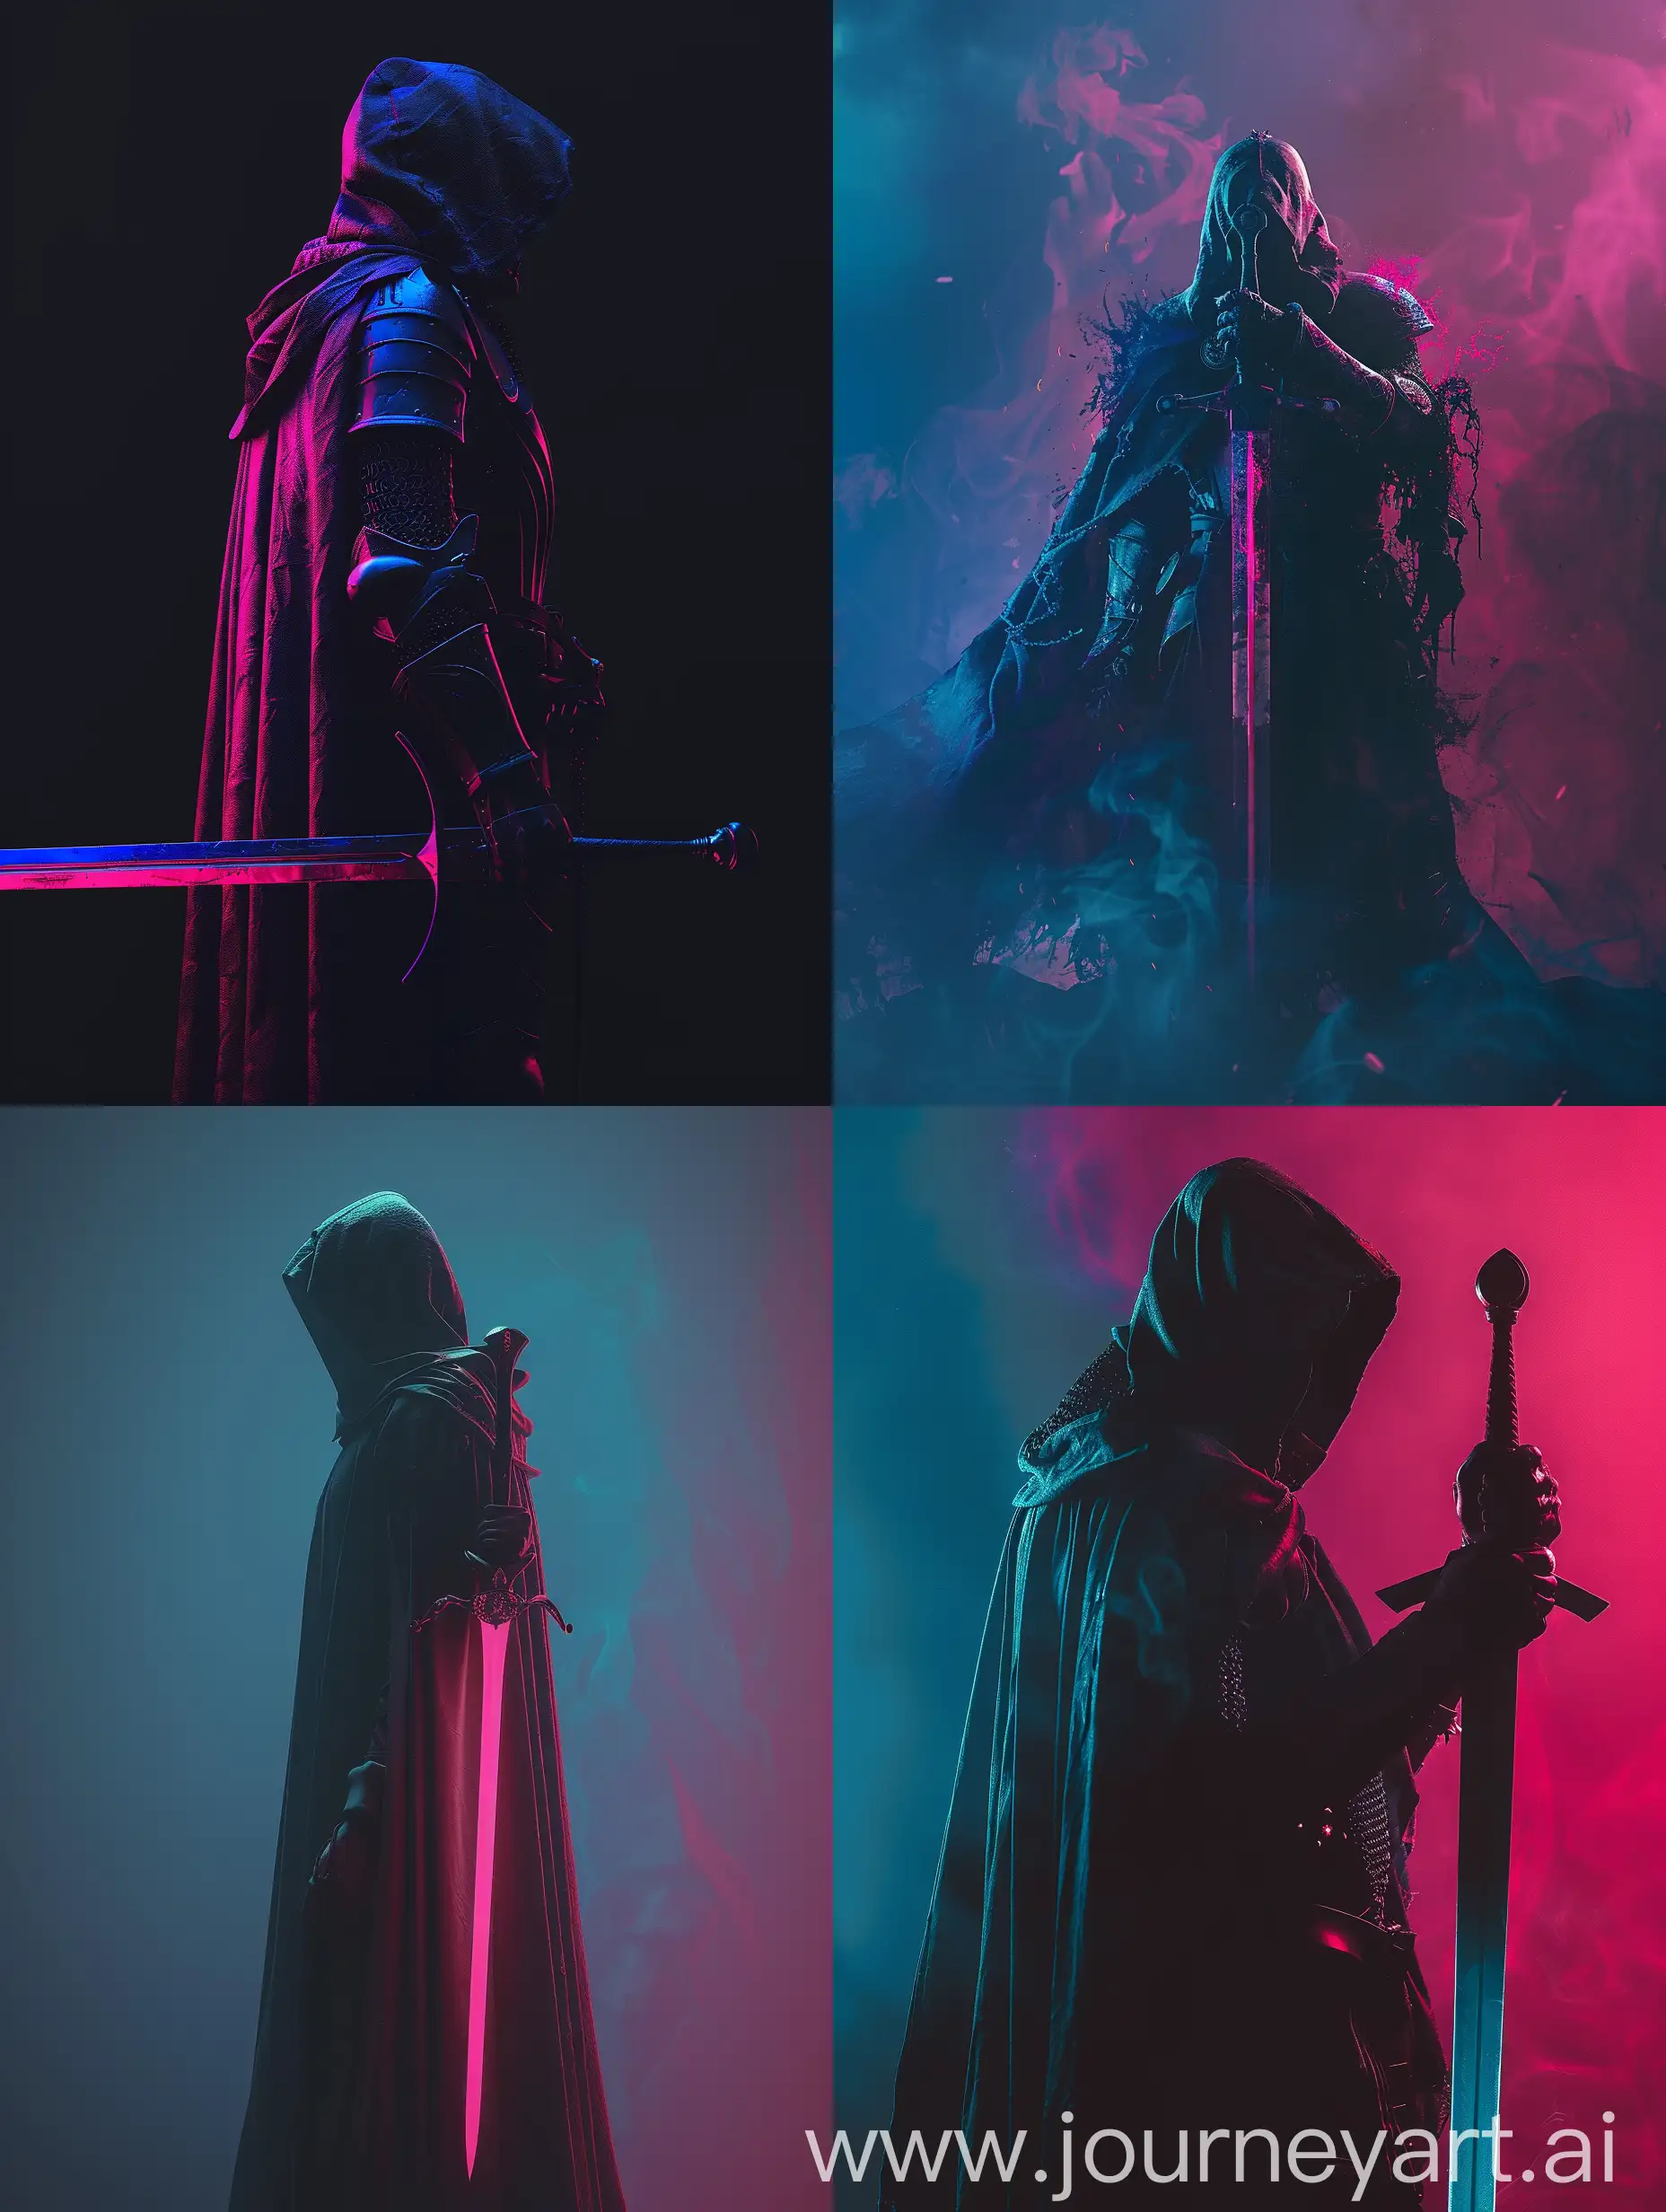 knight mystery, sword, glow in the dark,with subtle pink and blue gradients, shadow, fantasy, ultra quality, ultra detailed, realistic photo.